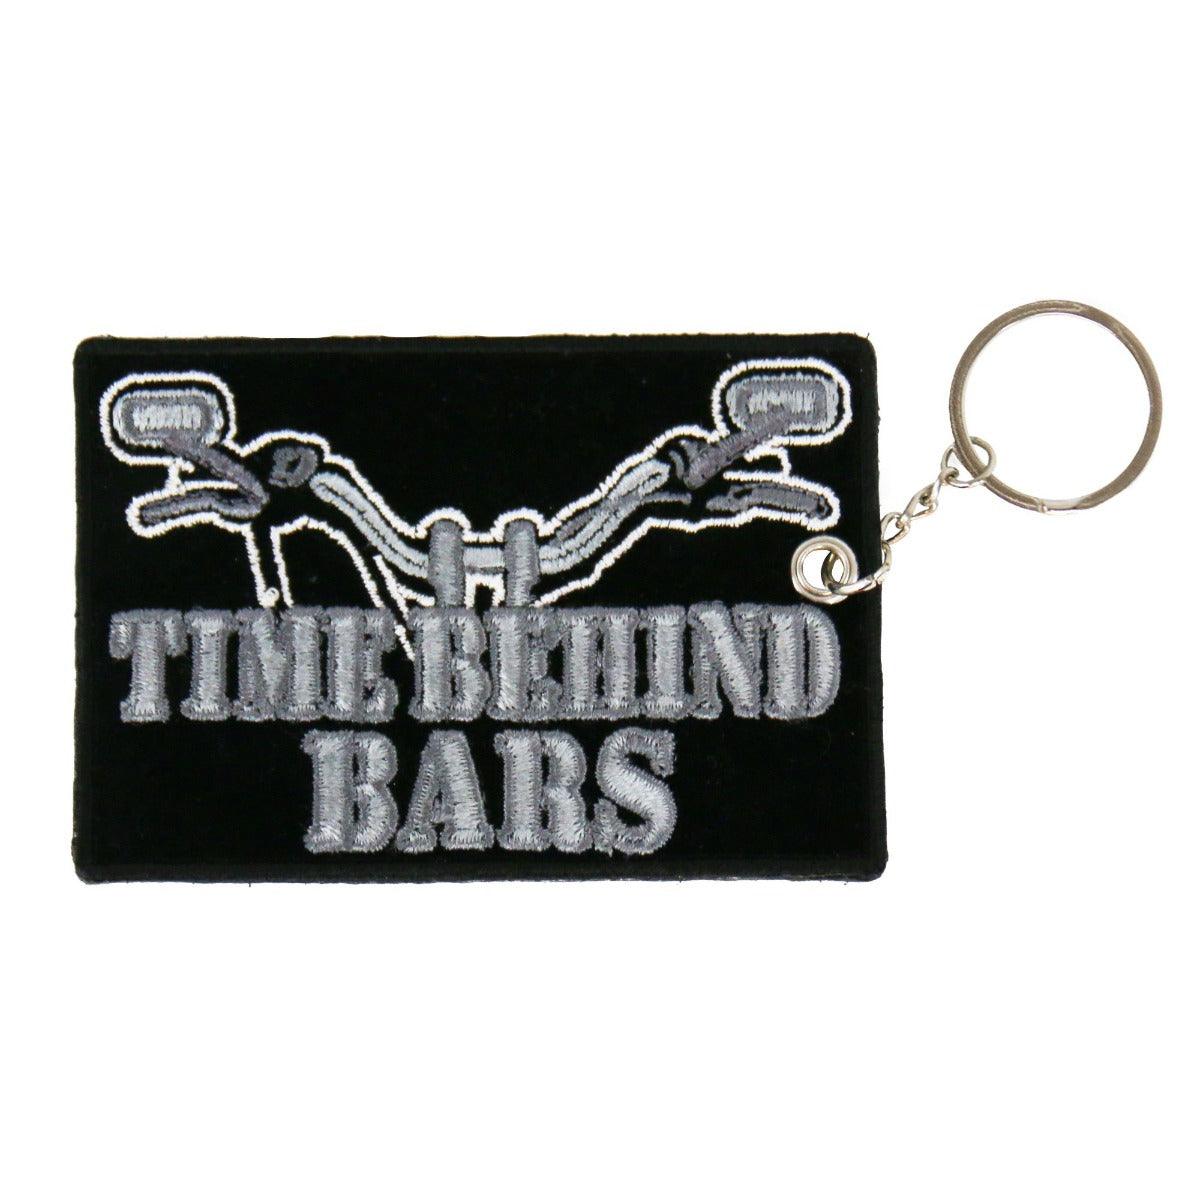 Hot Leathers Time Behind Bars Embroidered Key Chain - American Legend Rider